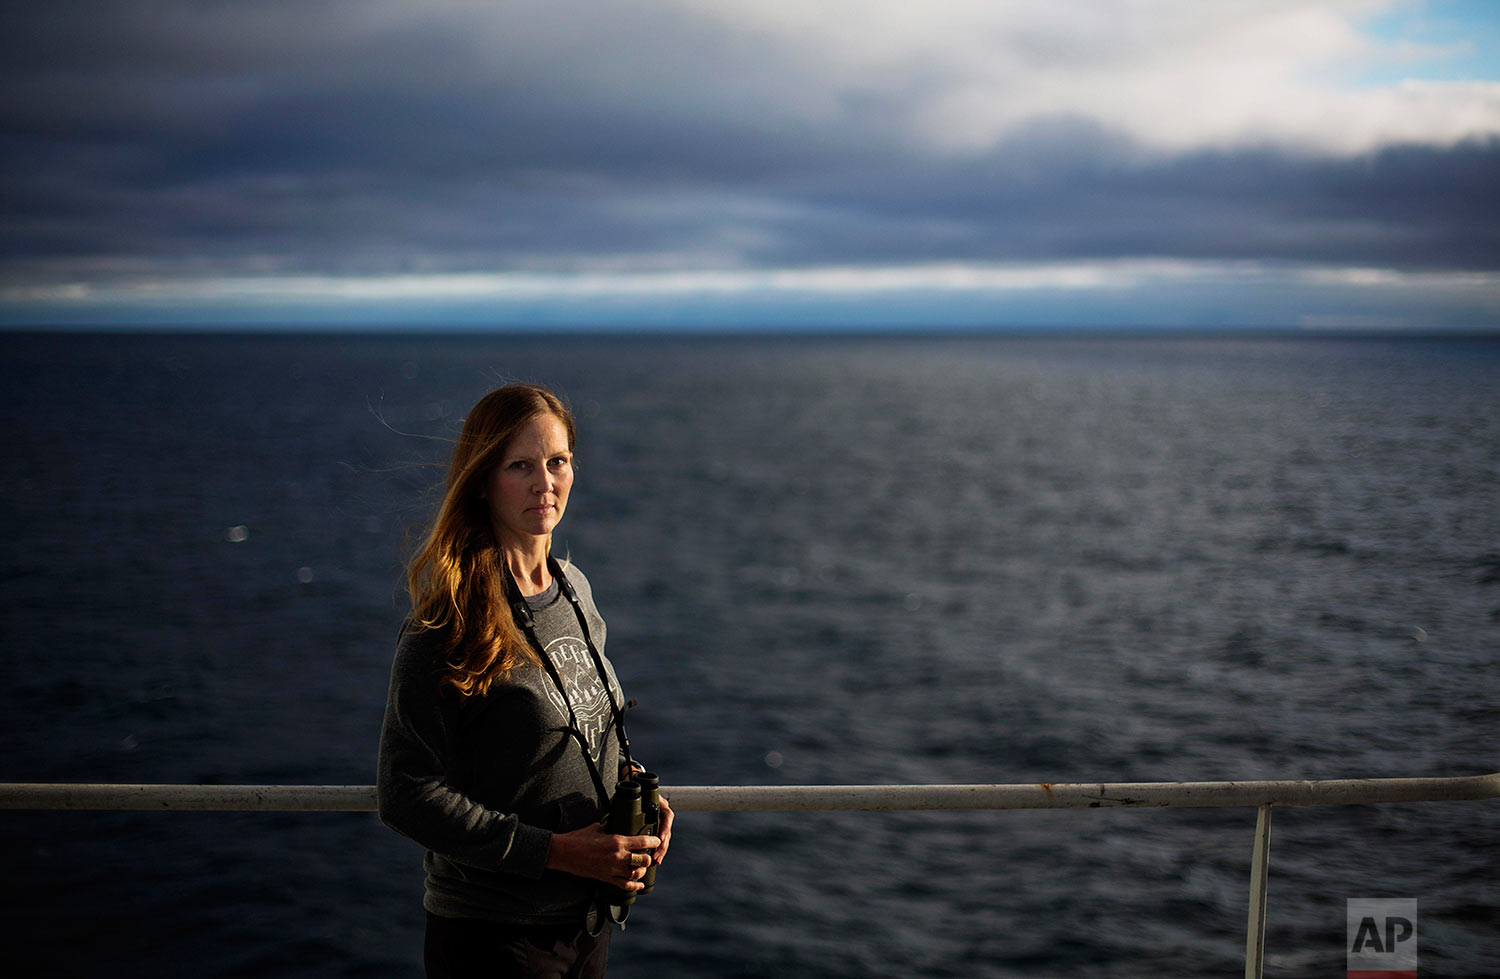  Field biologist Paula von Weller, 45, of Portland, Ore., stands for a portrait aboard the Finnish icebreaker MSV Nordica as it sails in the North Pacific Ocean toward the Bering Strait, Tuesday, July 11, 2017. "Few people in the world get to sail th